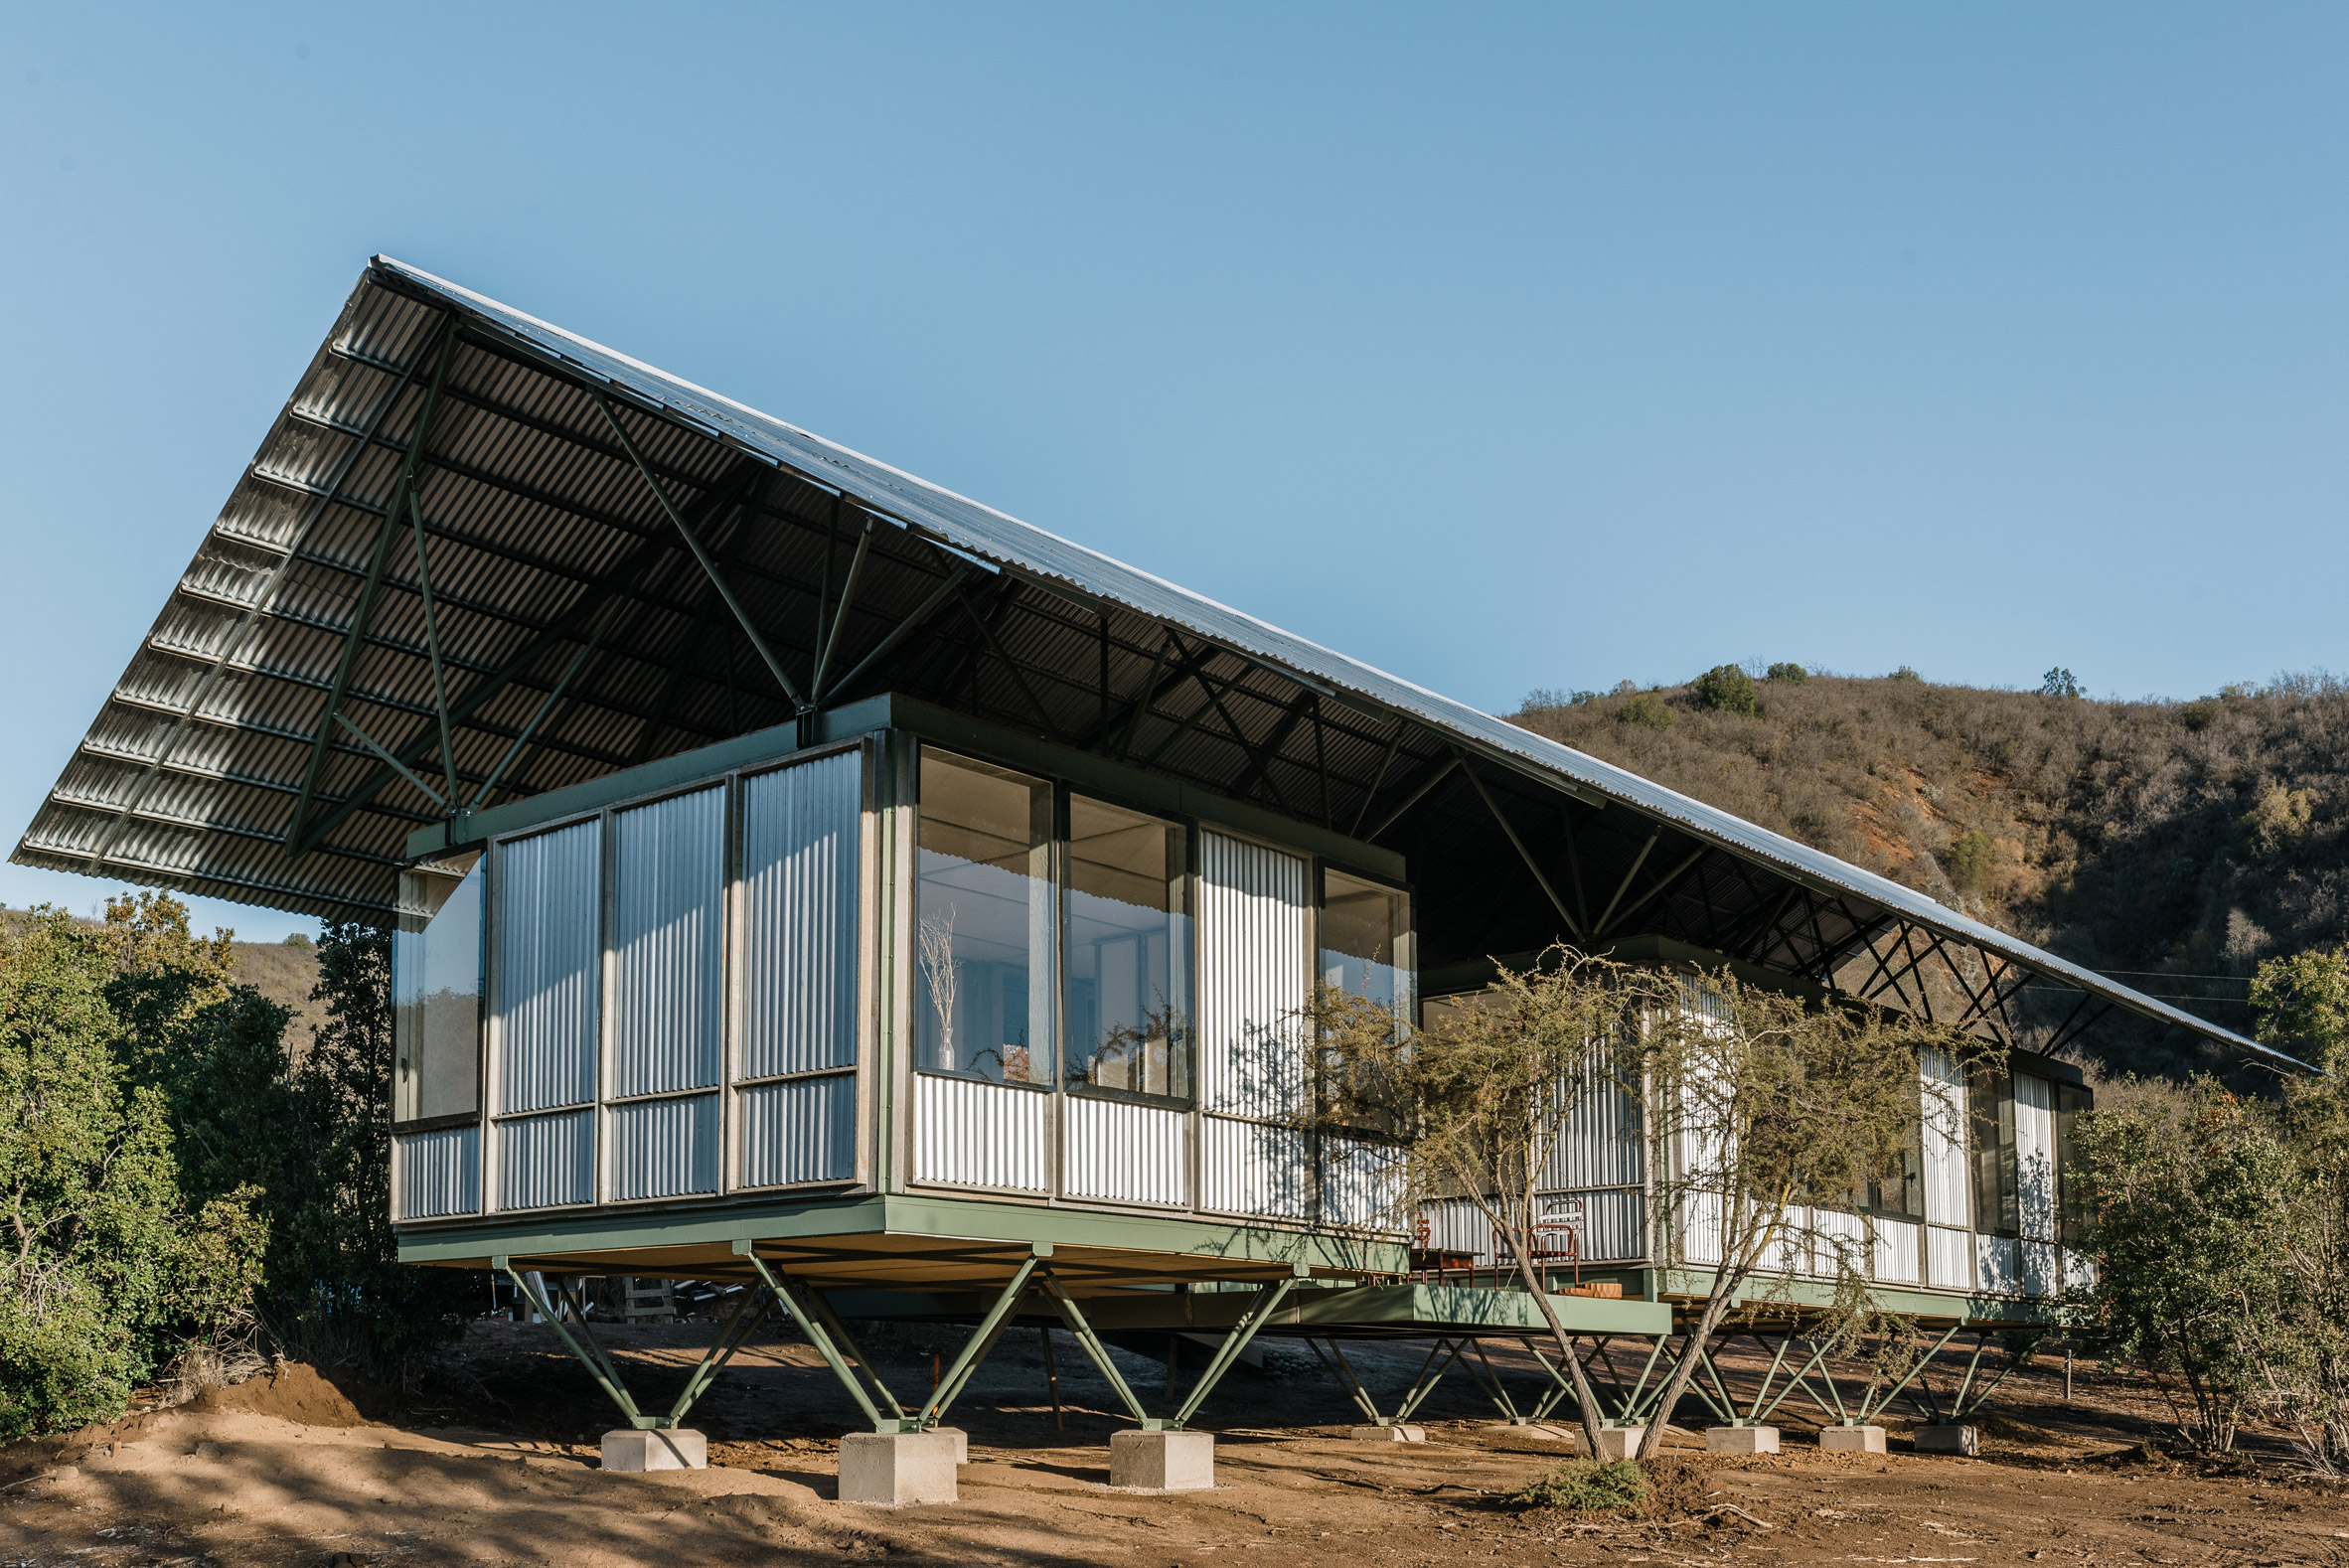 Layered recycled wood fiber panels on housing prototype in Chile